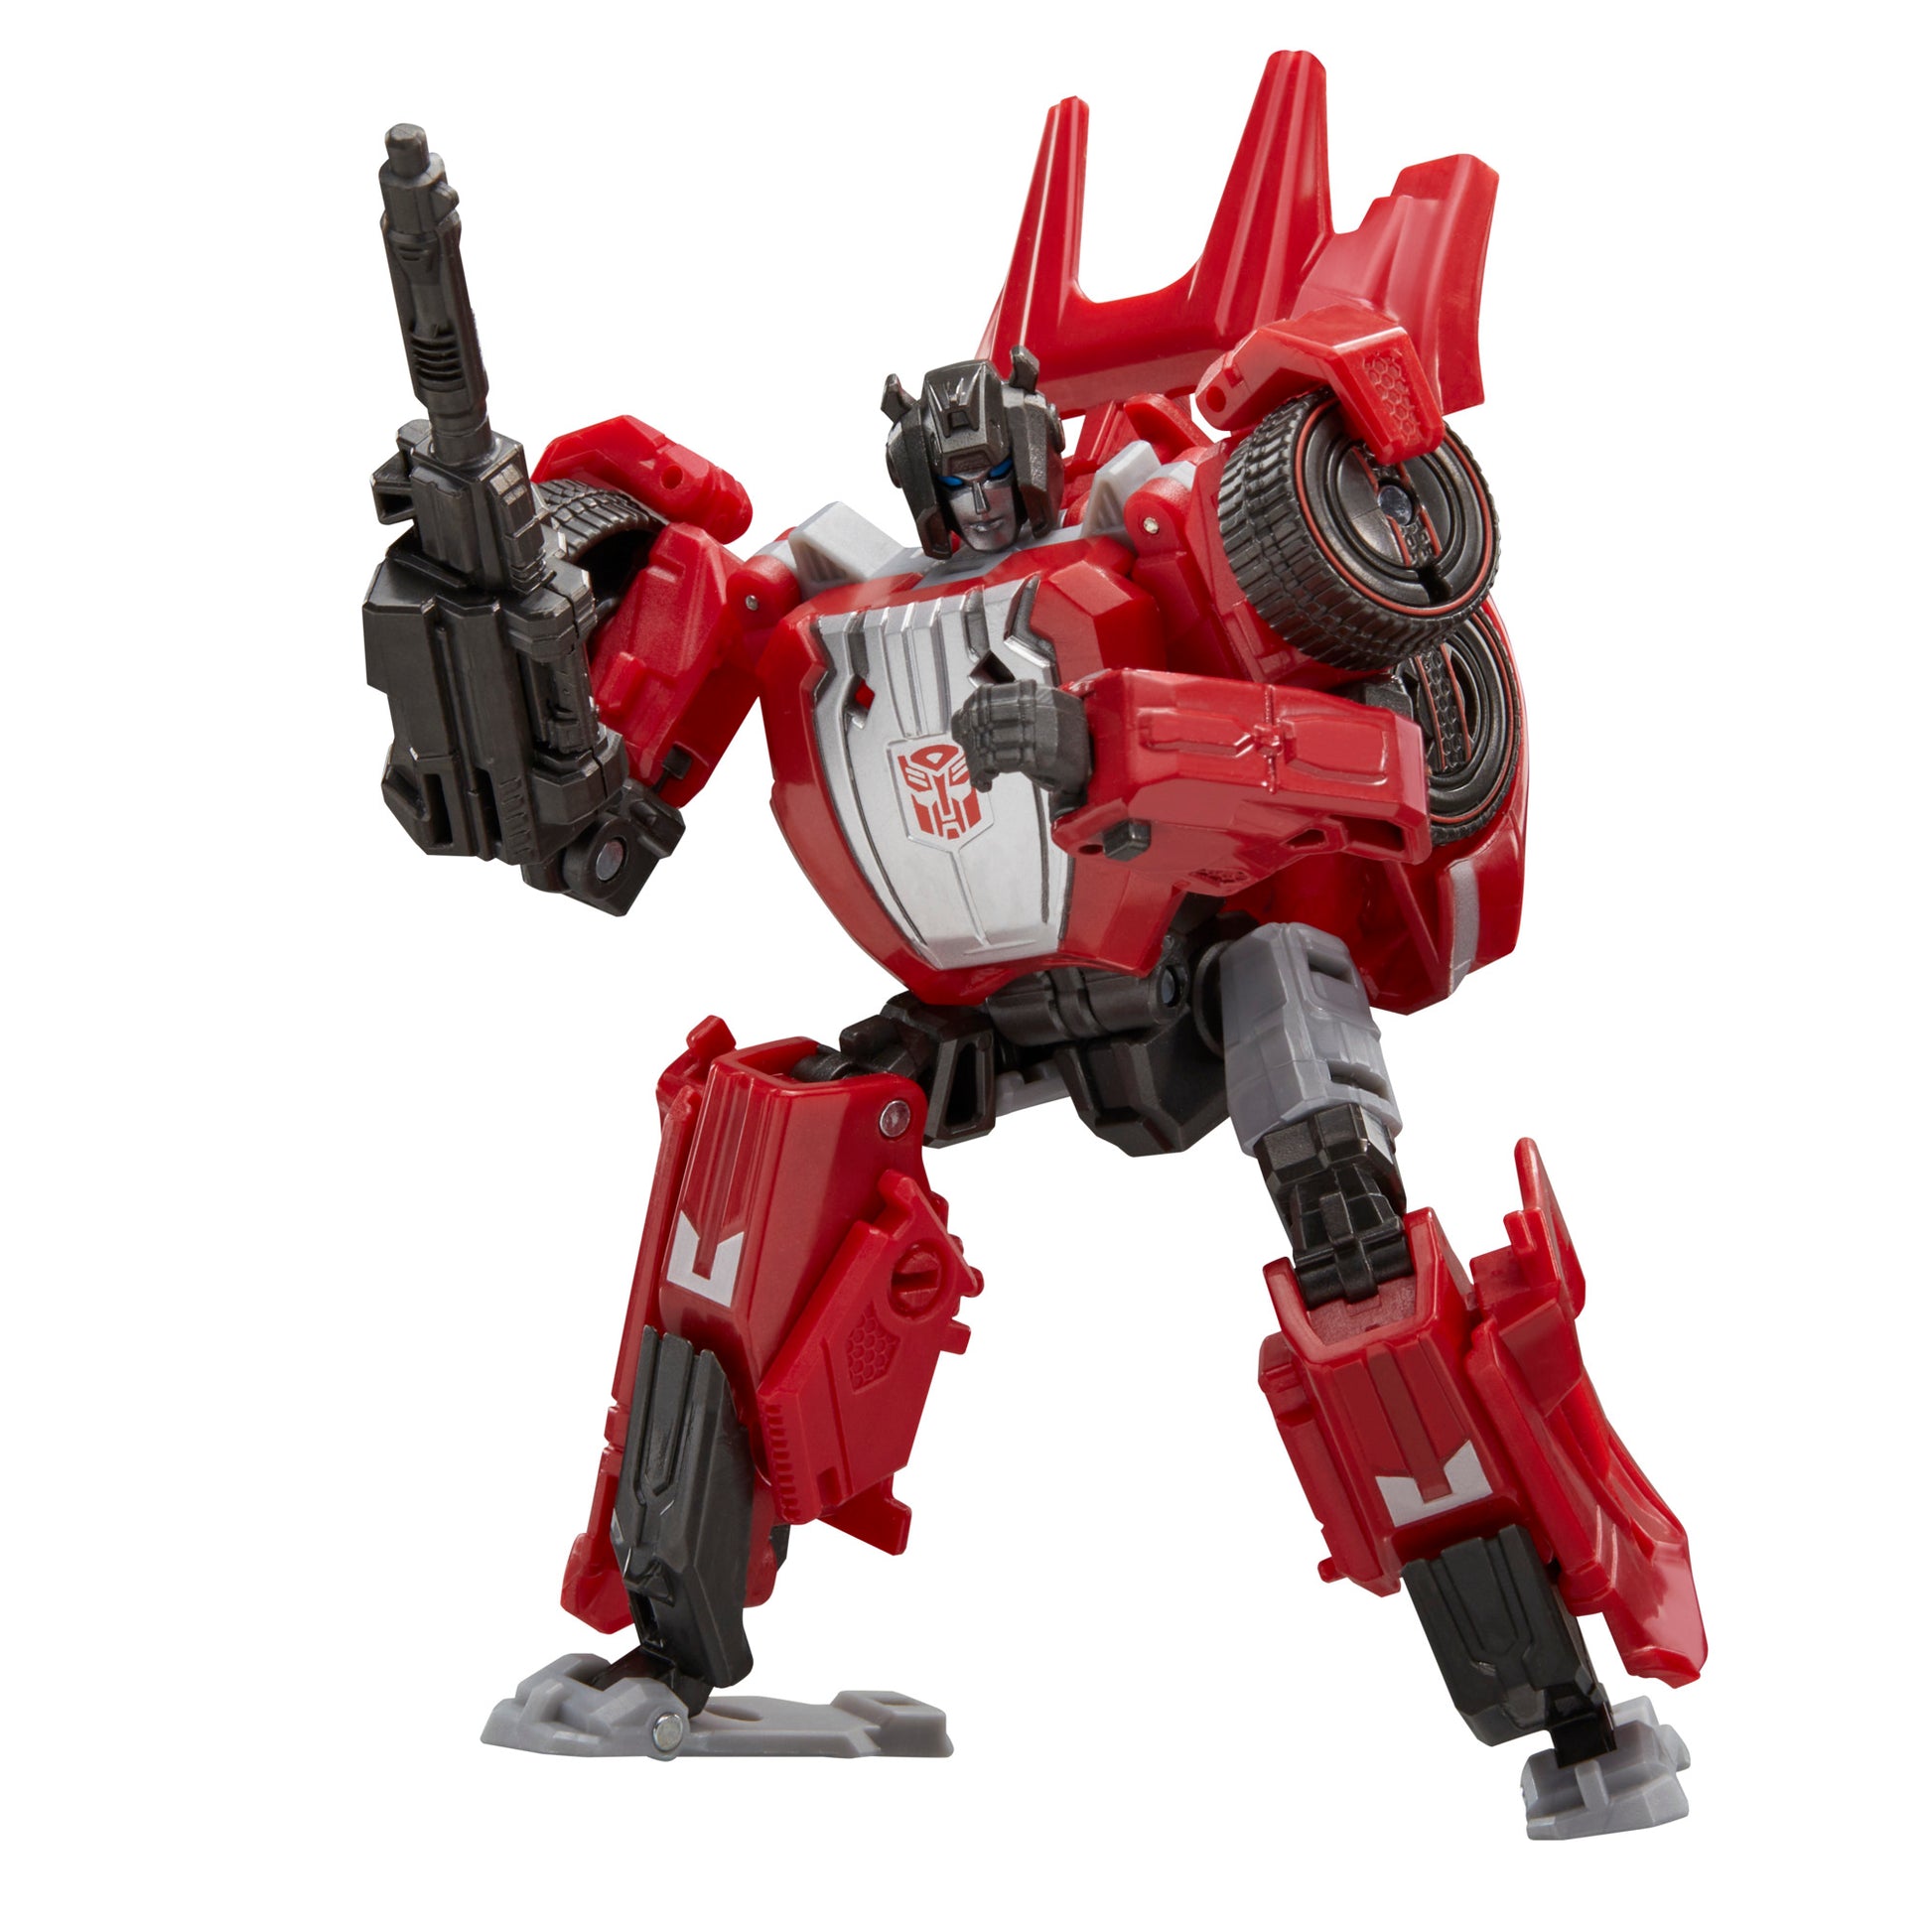 Transformers Studio Series Deluxe Transformers: War for Cybertron 07 Gamer Edition Sideswipe Action Figure